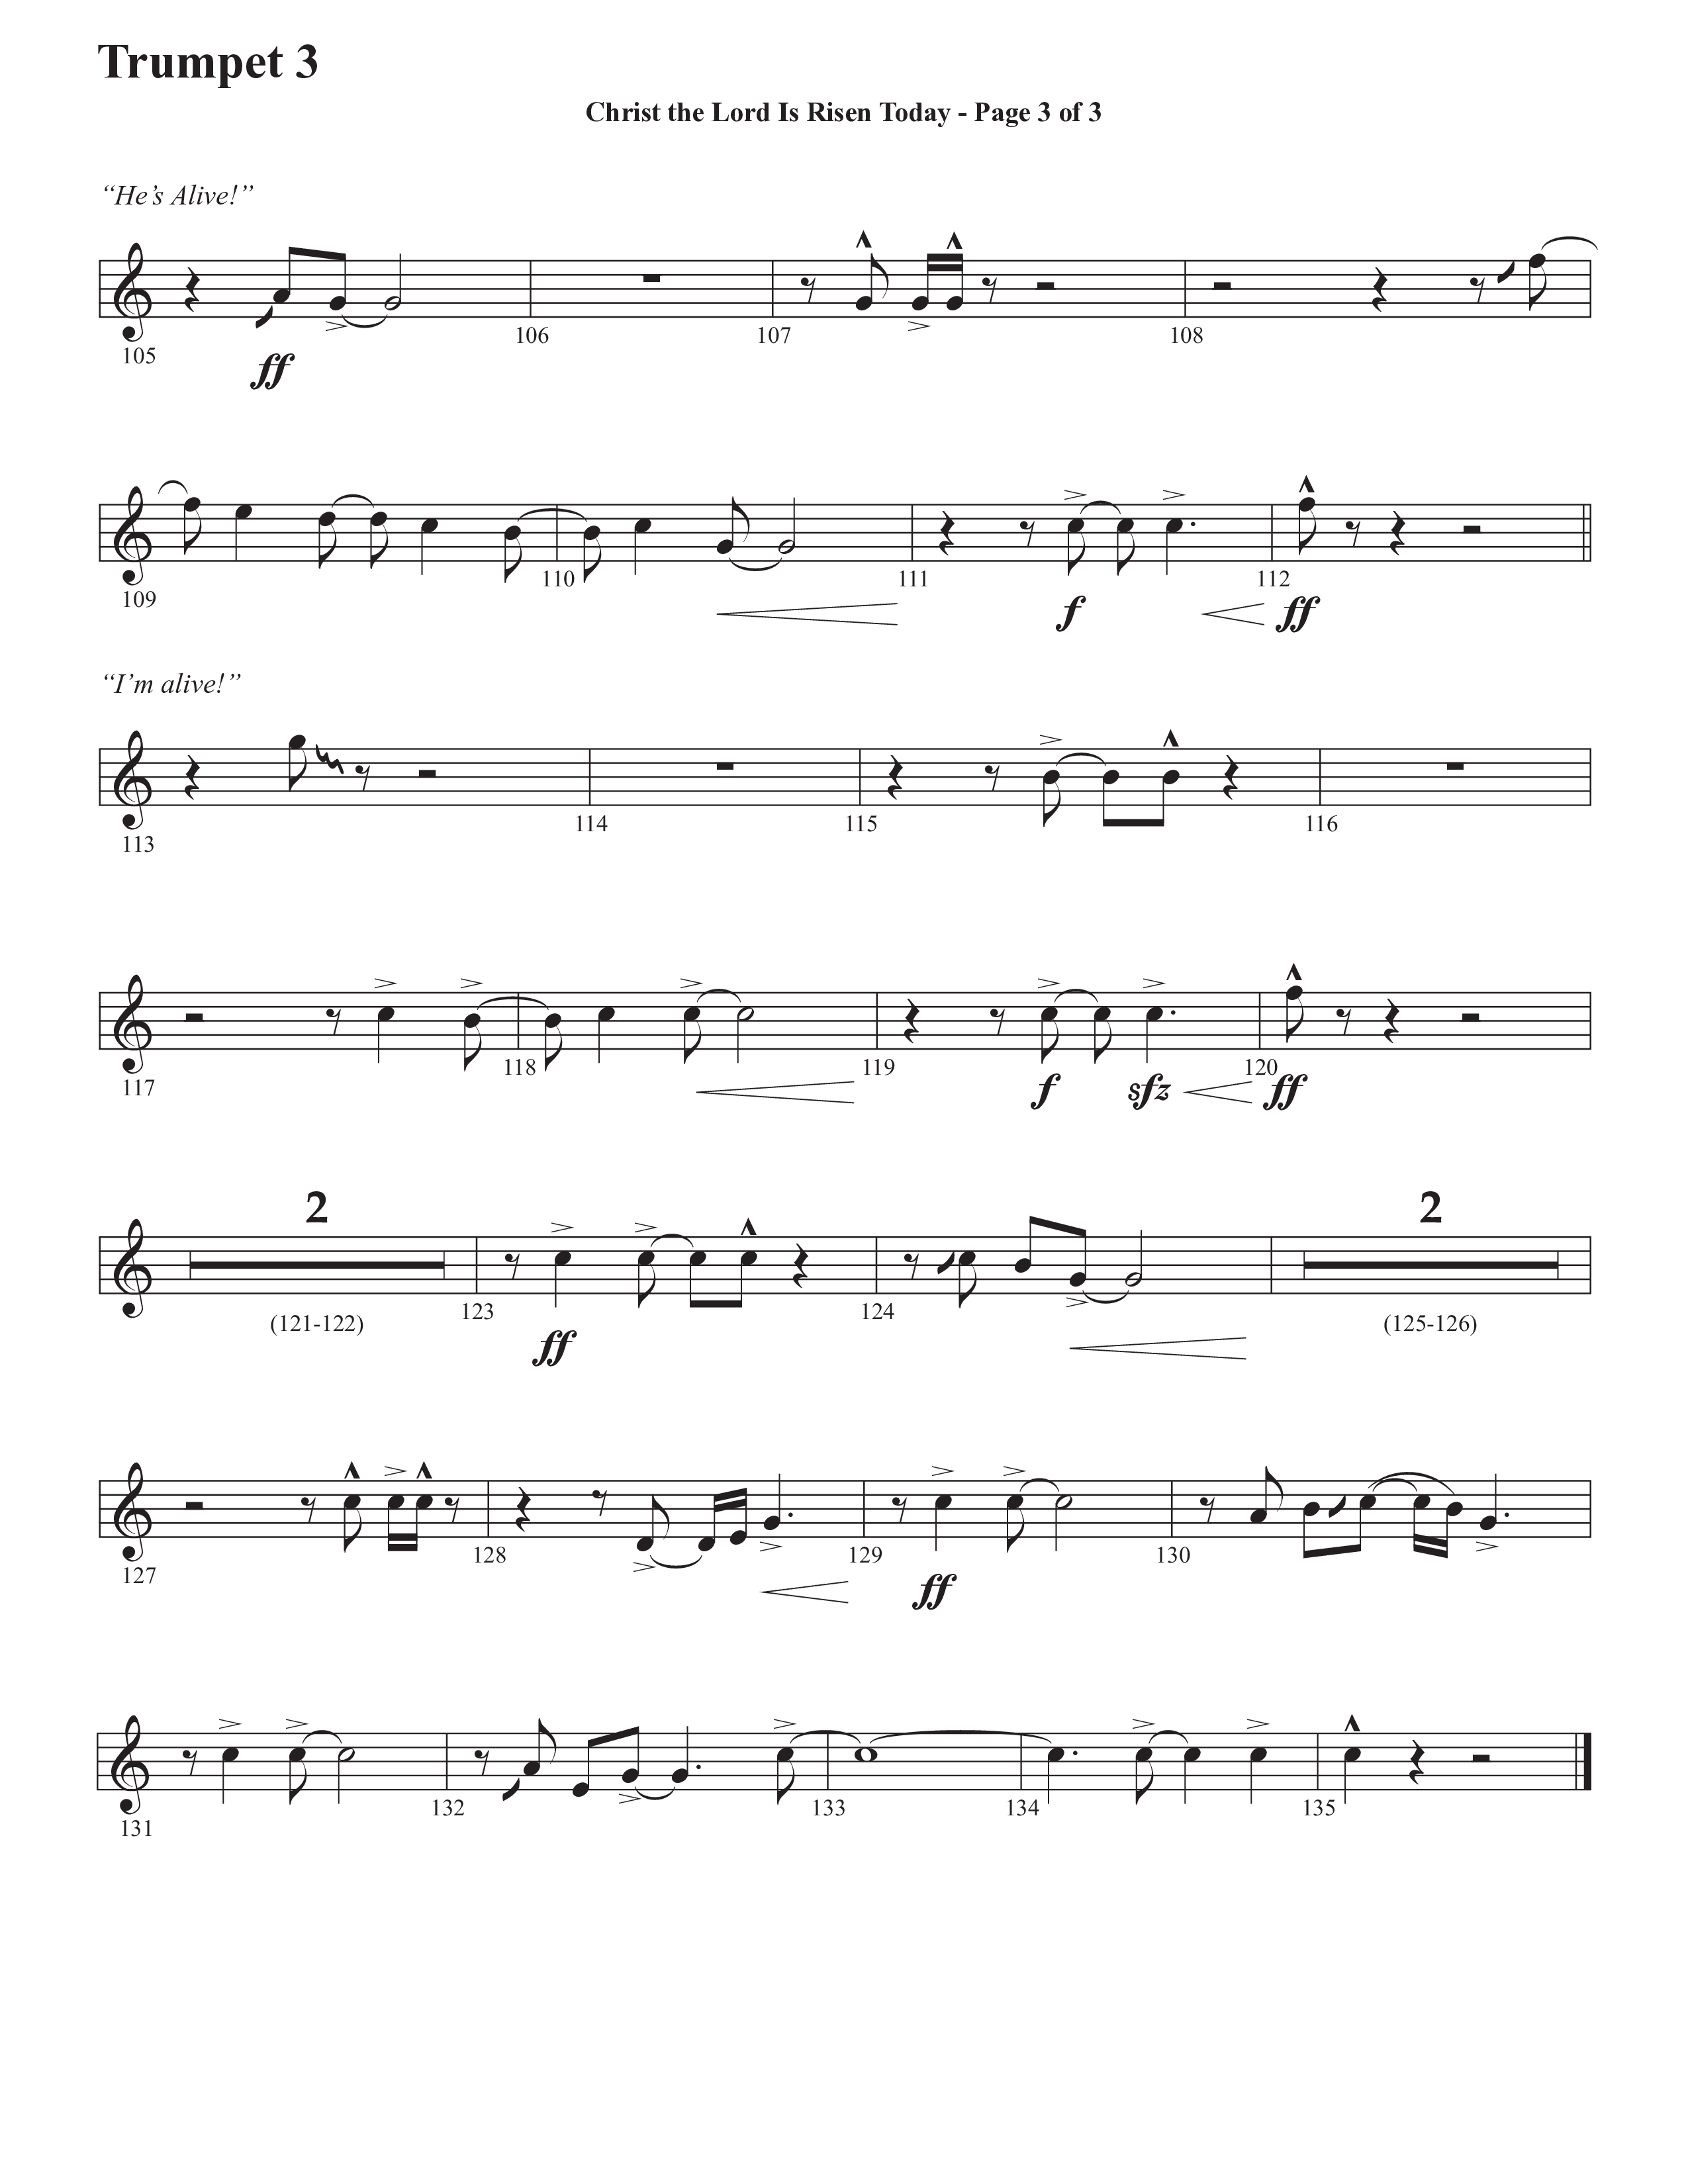 Christ The Lord Is Risen Today (He's Alive) (Choral Anthem SATB) Trumpet 3 (Semsen Music / Arr. John Bolin / Orch. Cliff Duren)